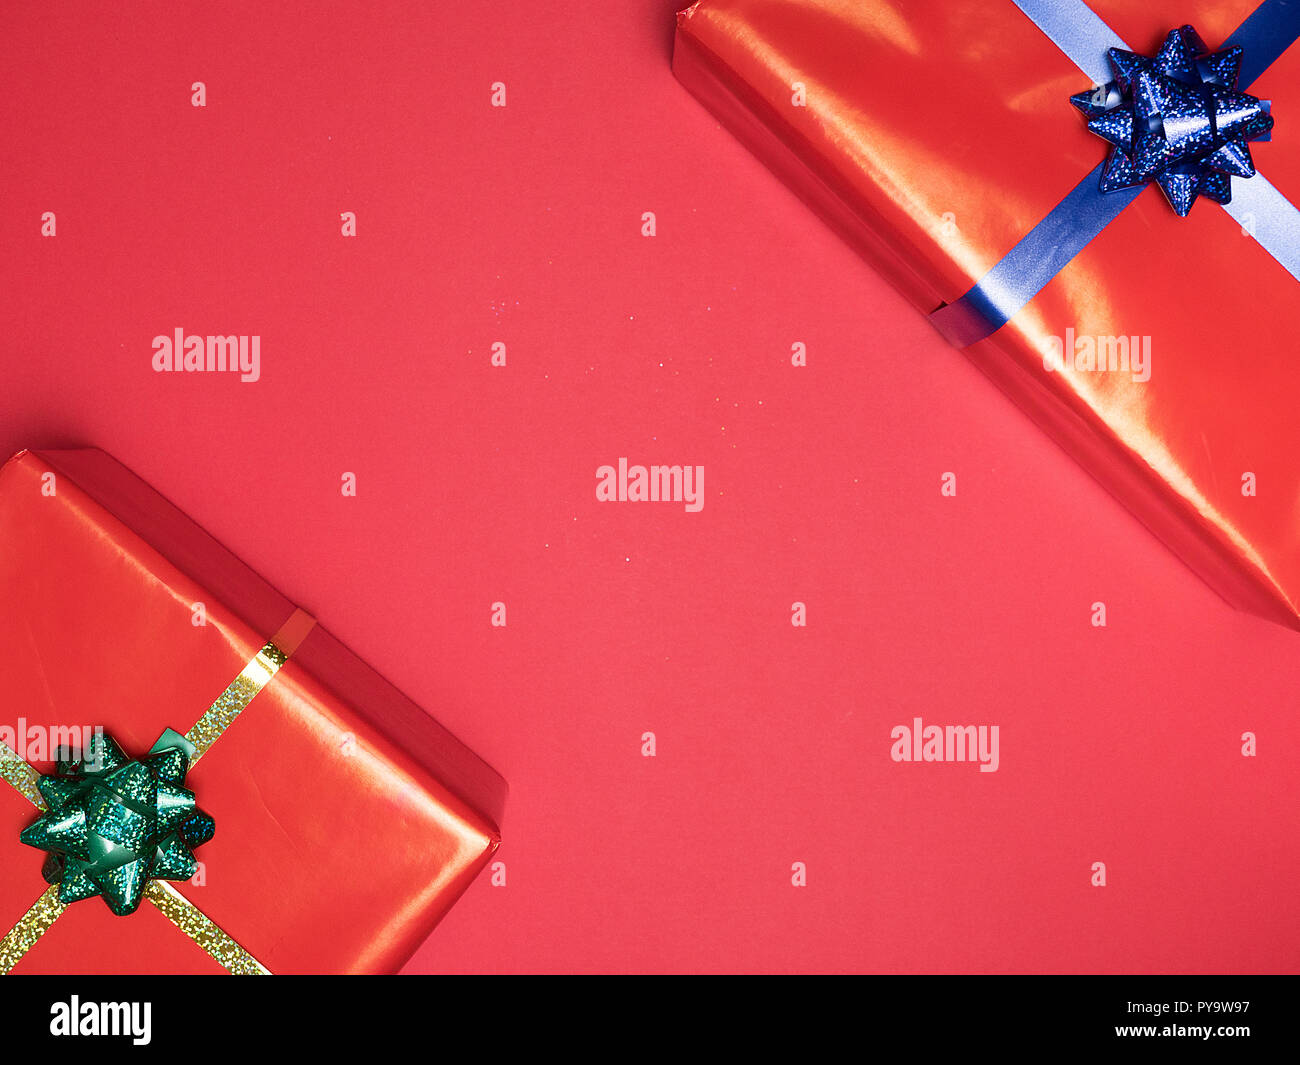 Beautiful Christmas red gif boxe on red background. Elegance style Stock Photo